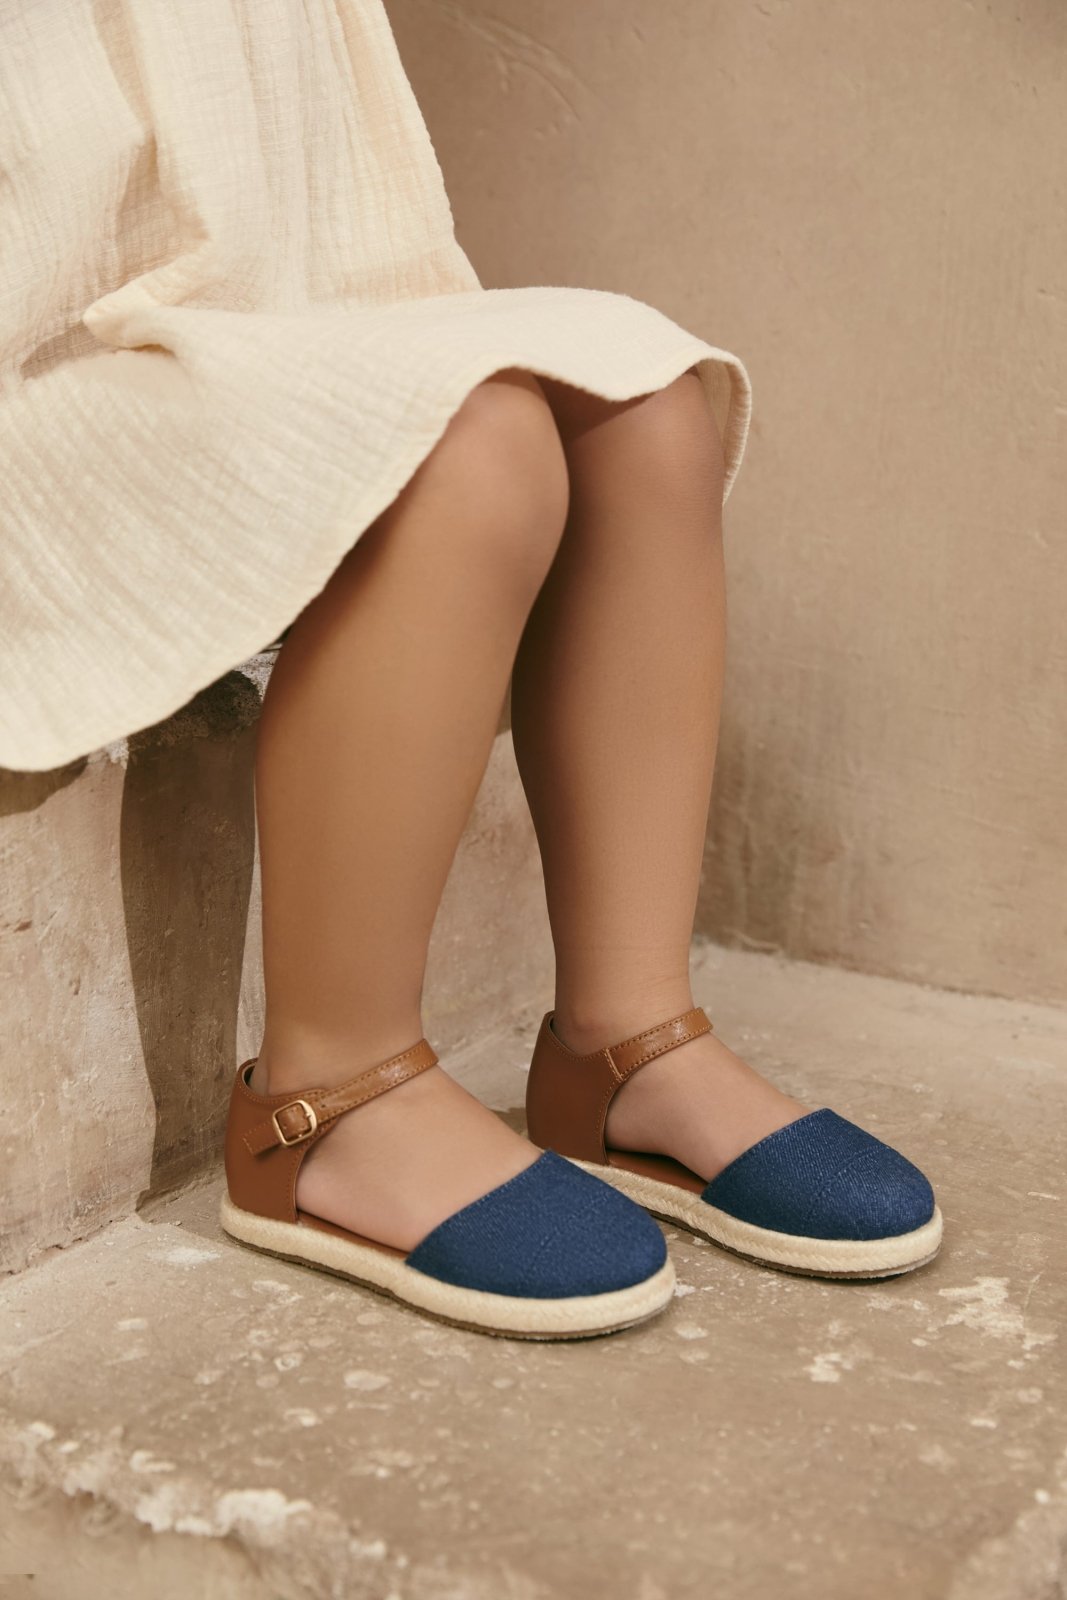 Freja 2.0 Navy/Camel Sandals by Age of Innocence